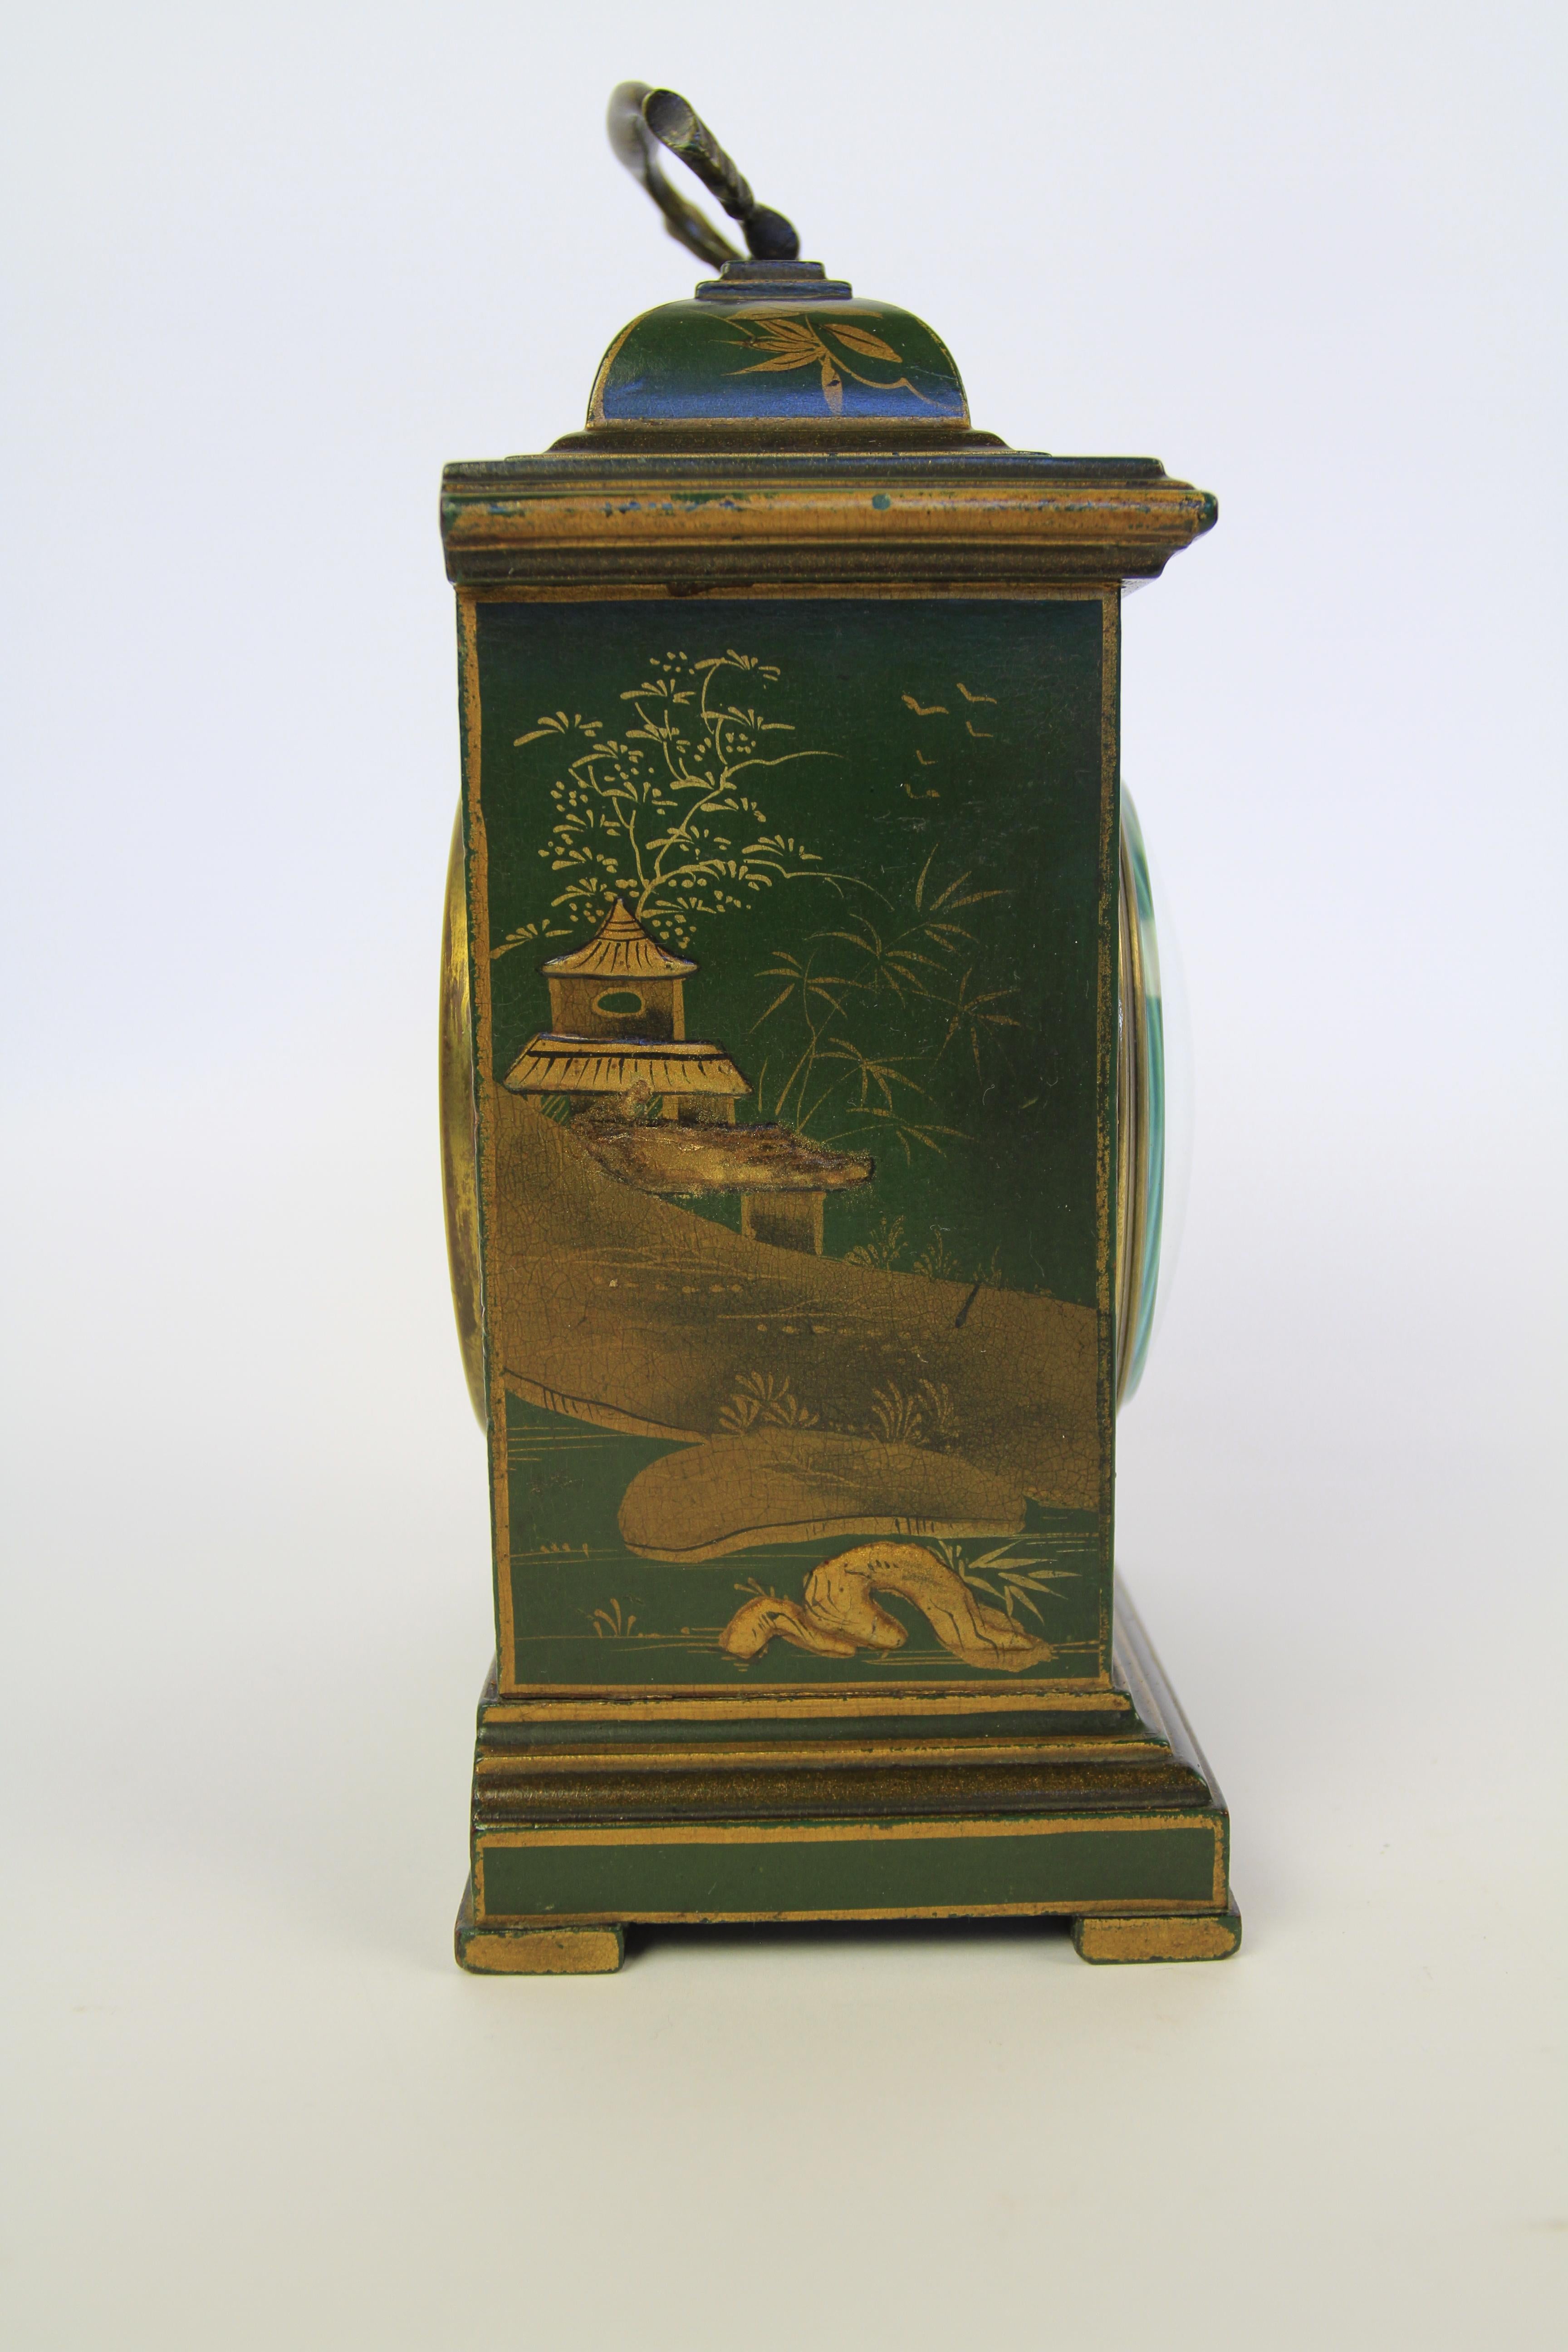 Edwardian Chinoiserie Decorated Mantel Clock
Green case with Gold Chinoiserie Decoration
[ Photos show a blue strip on top dome , not there just a relection from the brass handle]
Bevelled Dome Glass, cream enamel face
French 8 day movement with